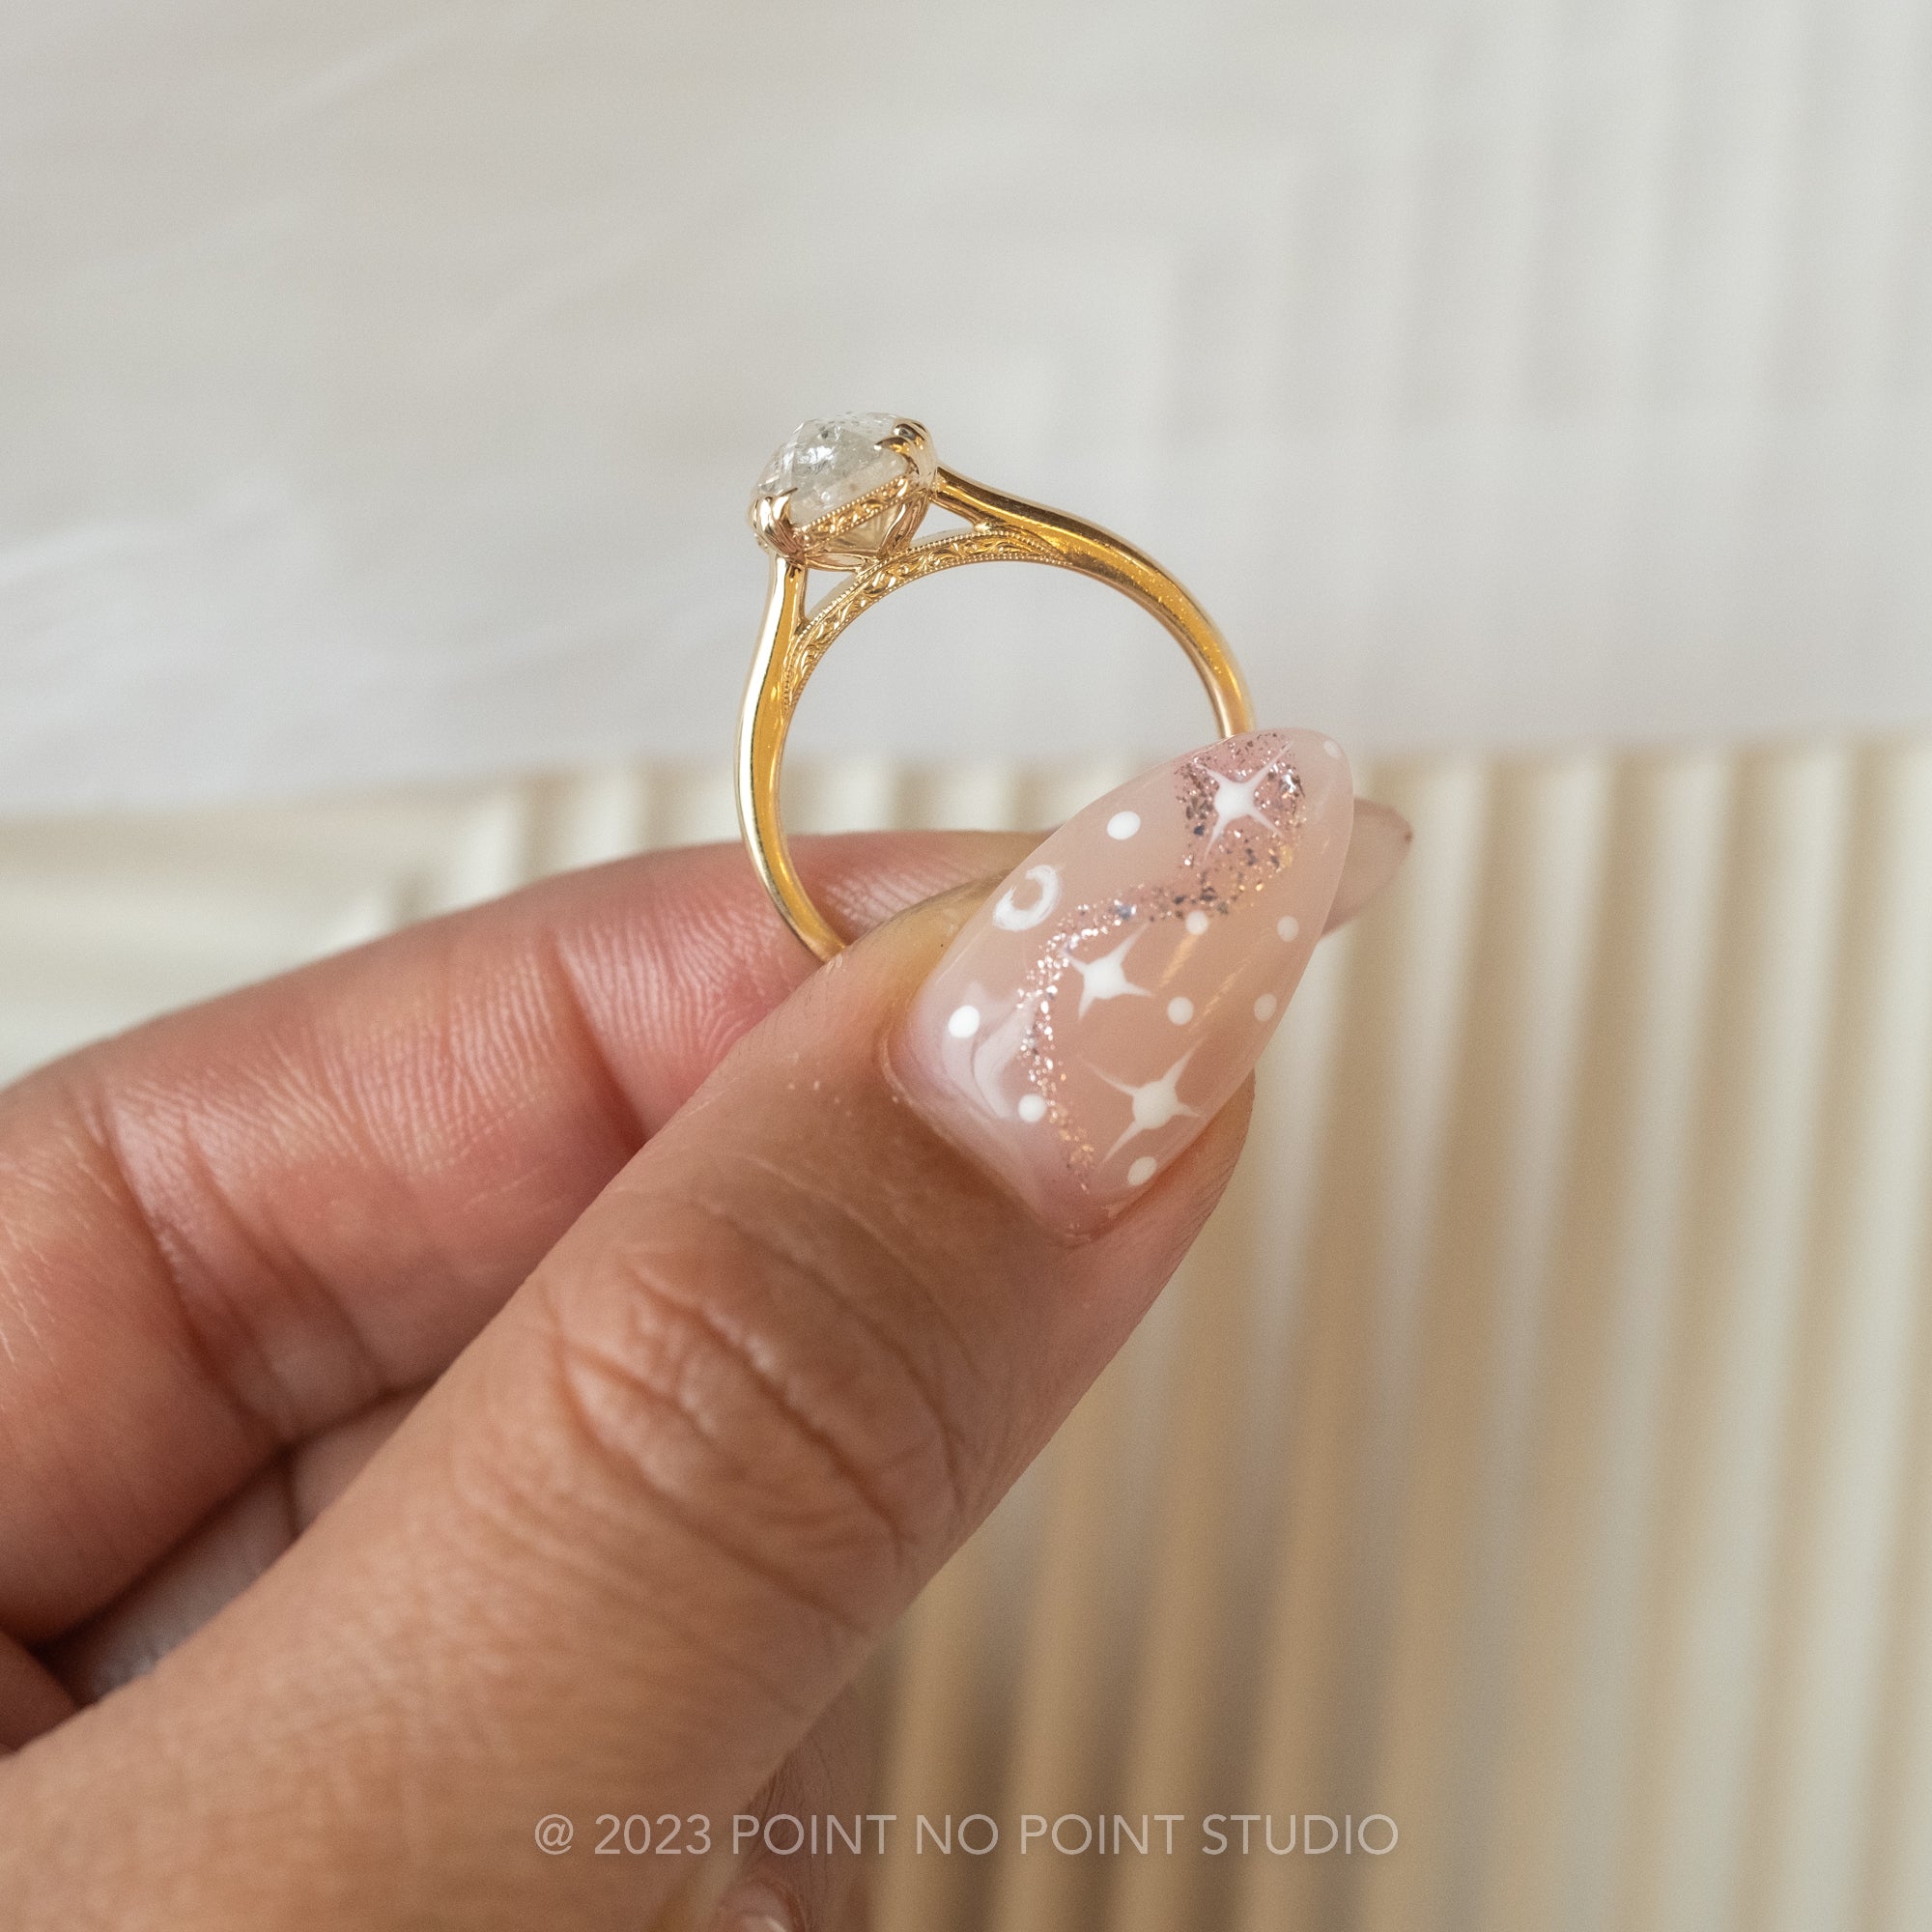 Create Your Own Vintage Style Custom Diamond Engagement Rings – Mark  Broumand